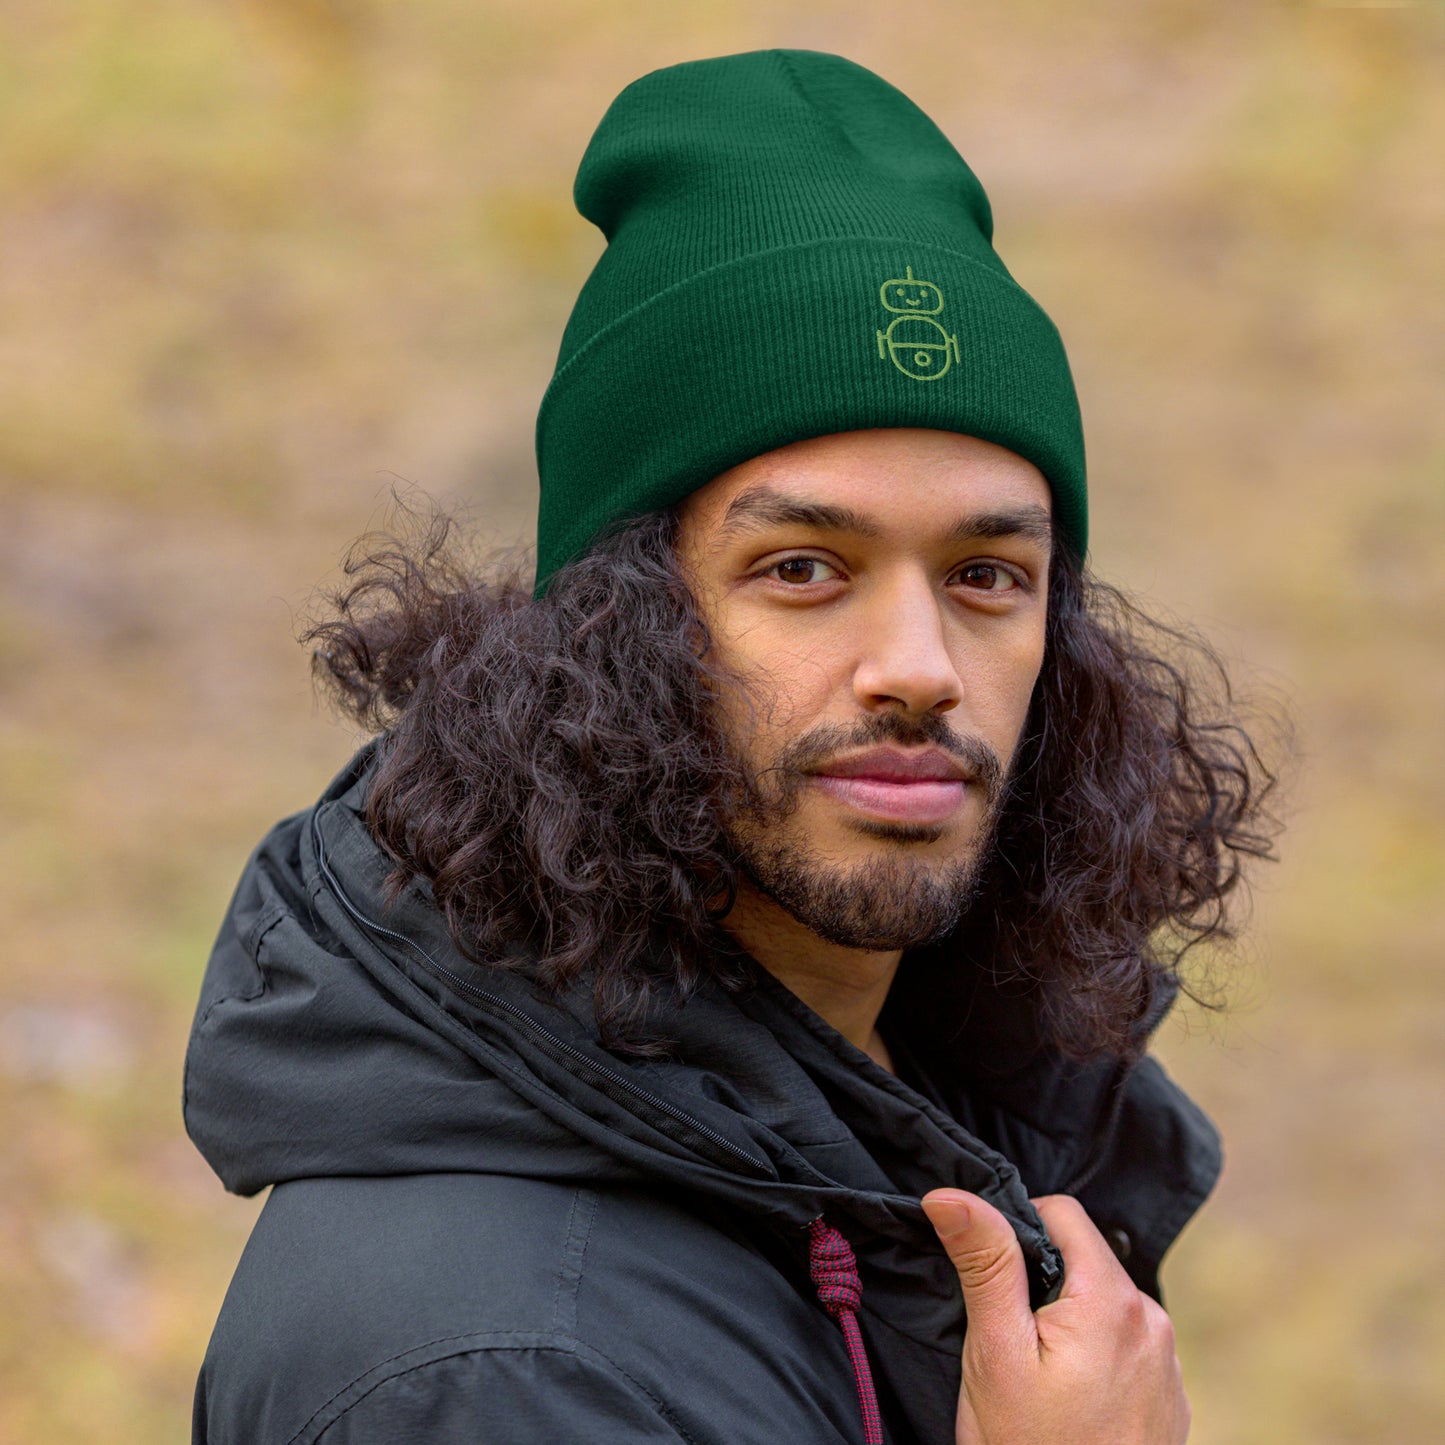 Men with green beanie and Android logo in green